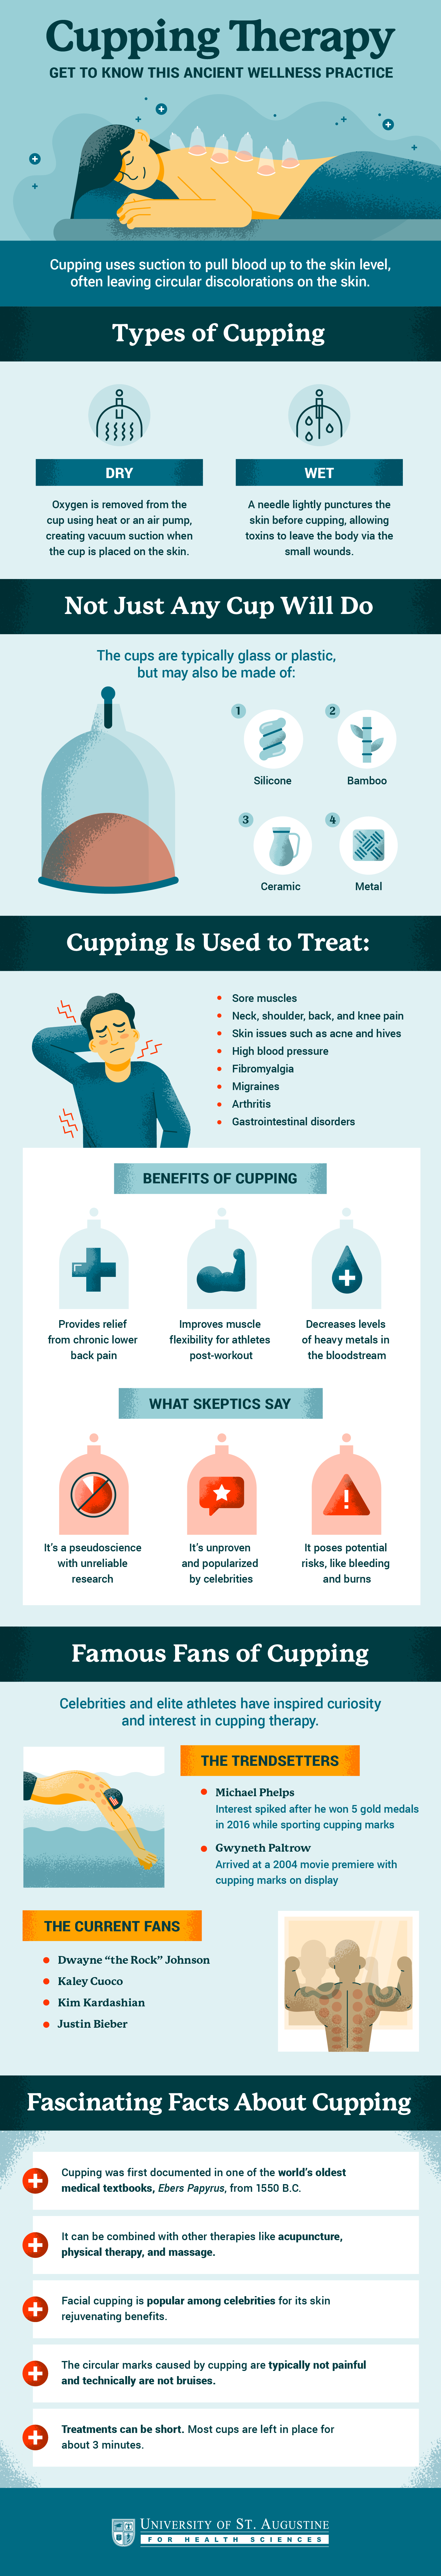 Infographic explaining cupping therapy